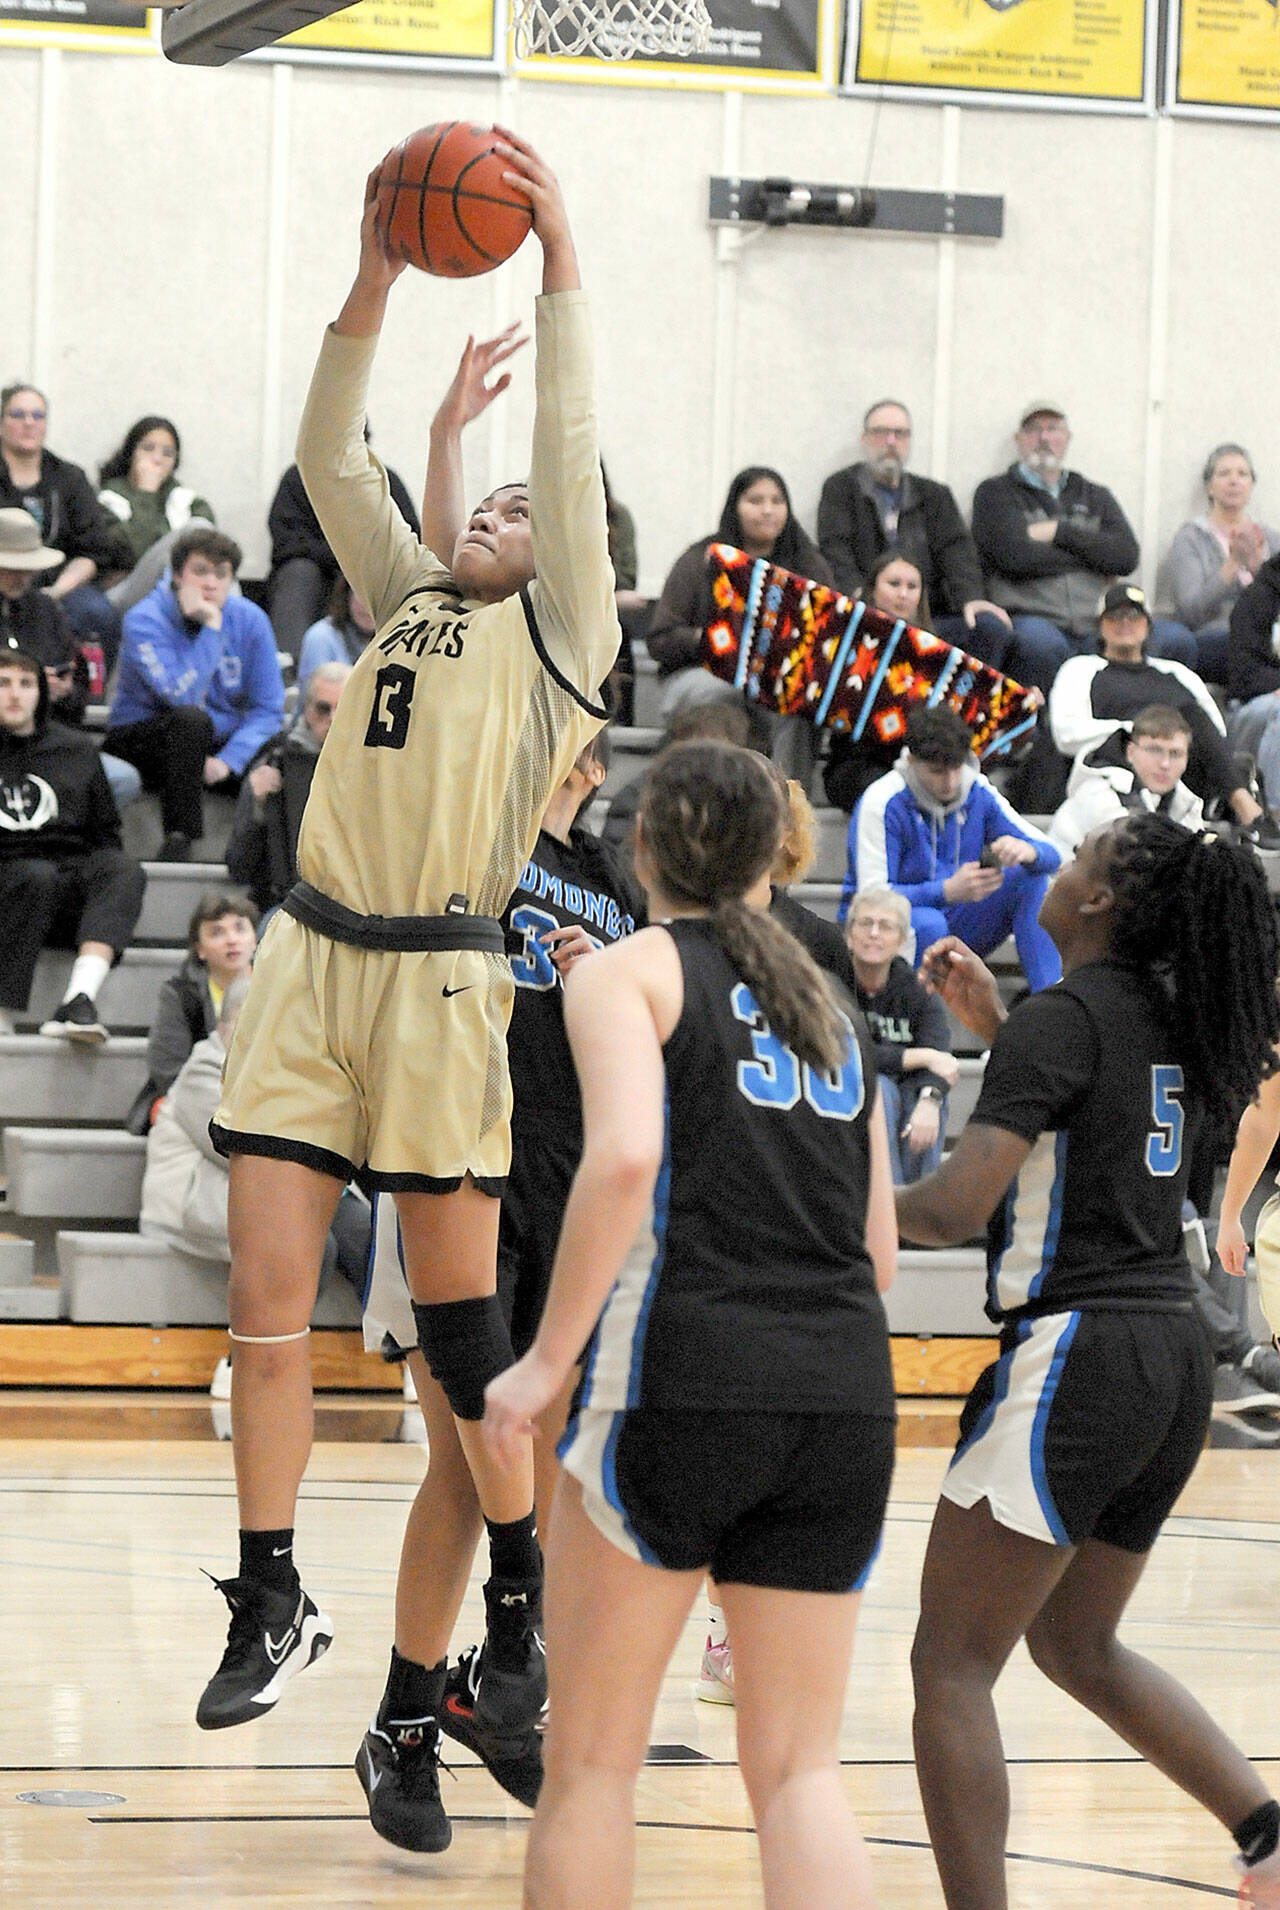 Photo by Keith Thorpe/Olympic Peninsula News Group / Peninsula’s Ituau Tuisaula reaches for the hoop as Edmonds defenders, from left, Leilani Motta, Aspen Carter and Danielle Woods look on during a Jan. 28 game in Port Angeles.